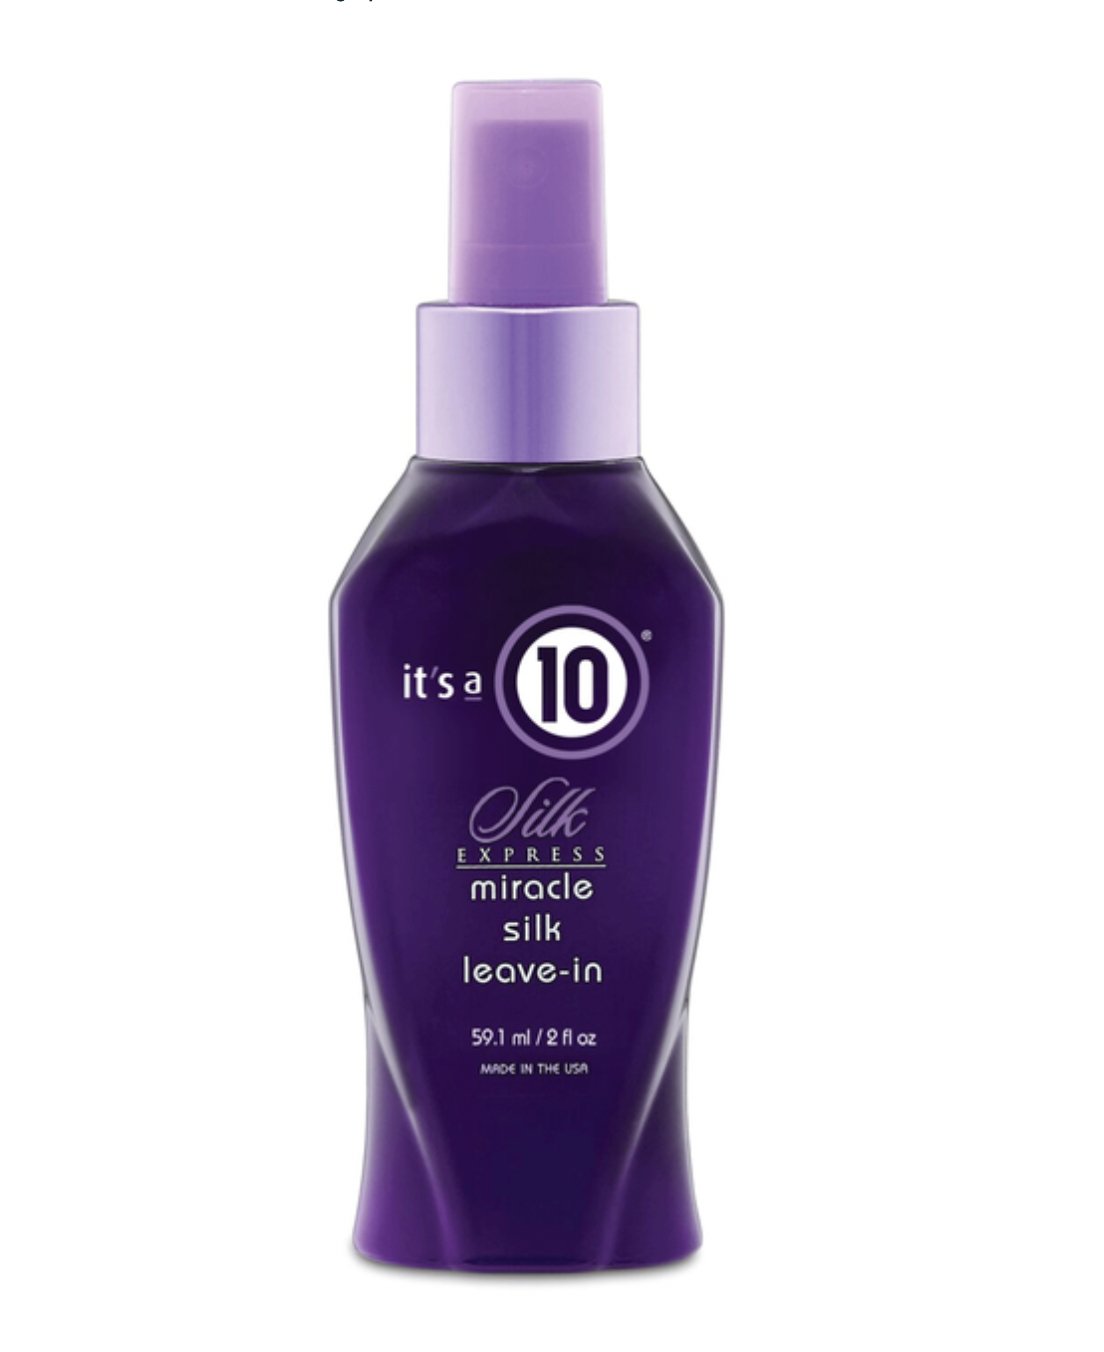 Silk Express Miracle Leave-In | It's A 10 - Lavender Hills BeautySalonCentric